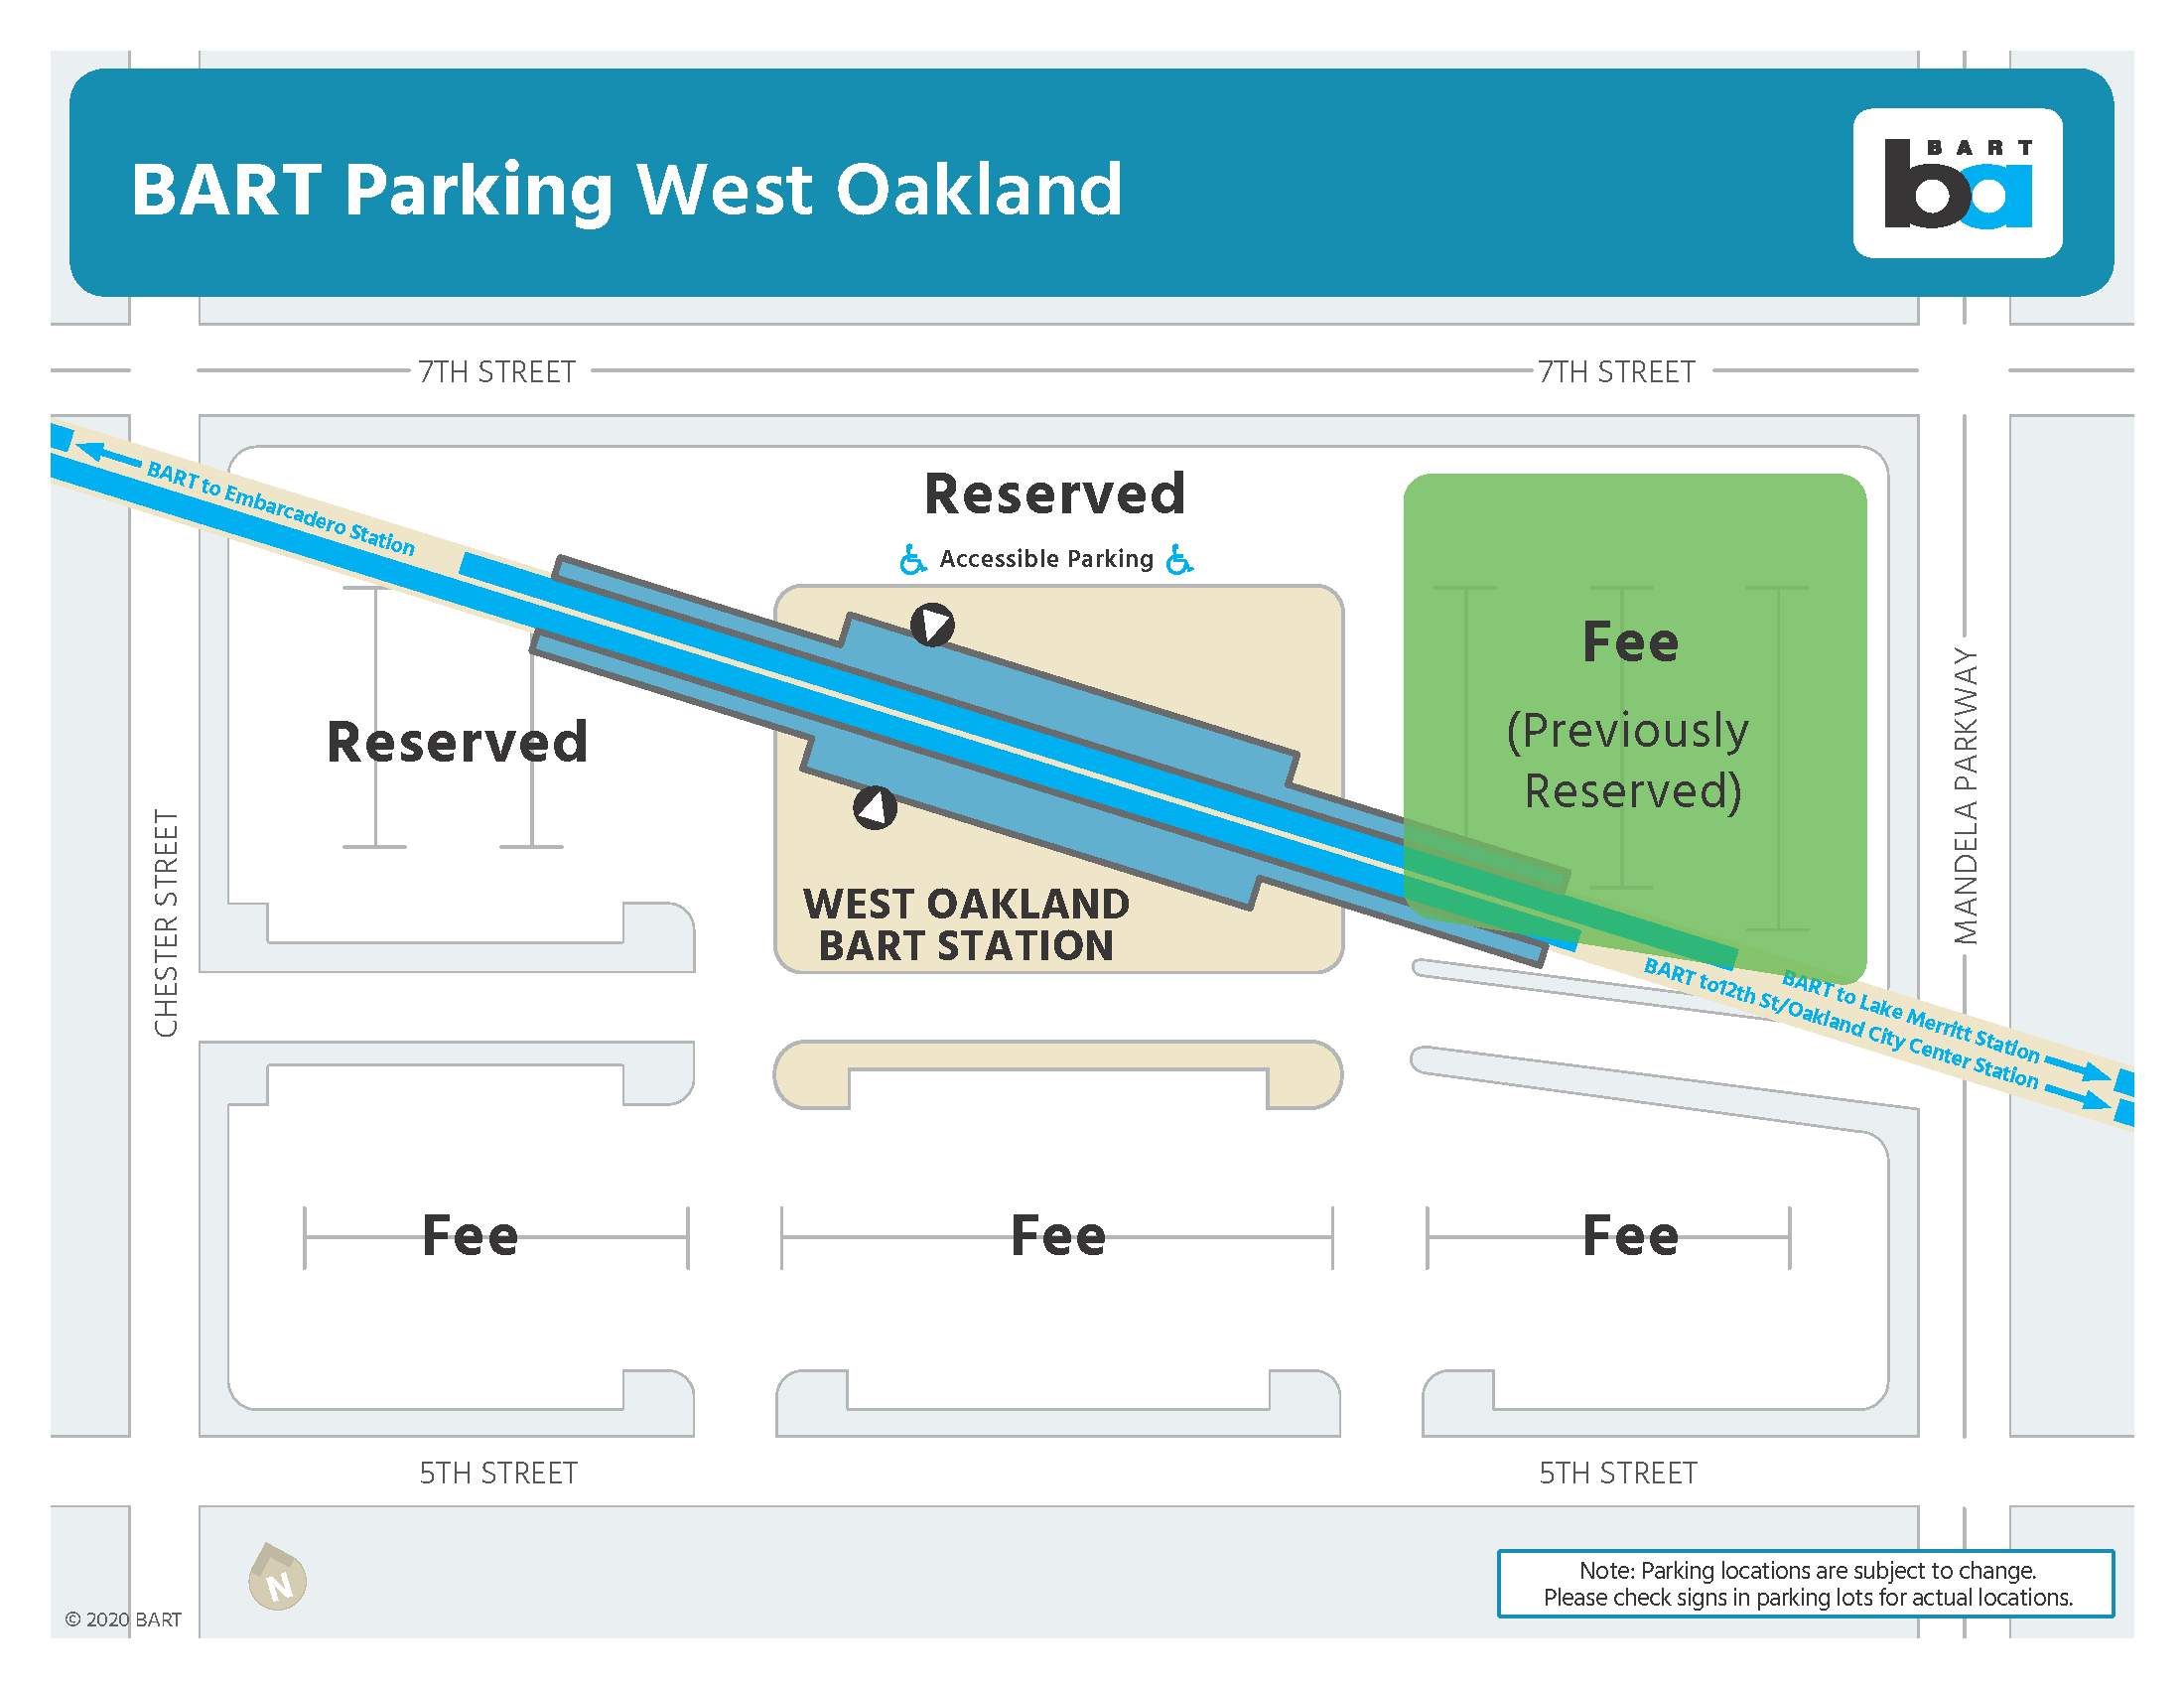 Parking areas at West Oakland Station being reconfigured